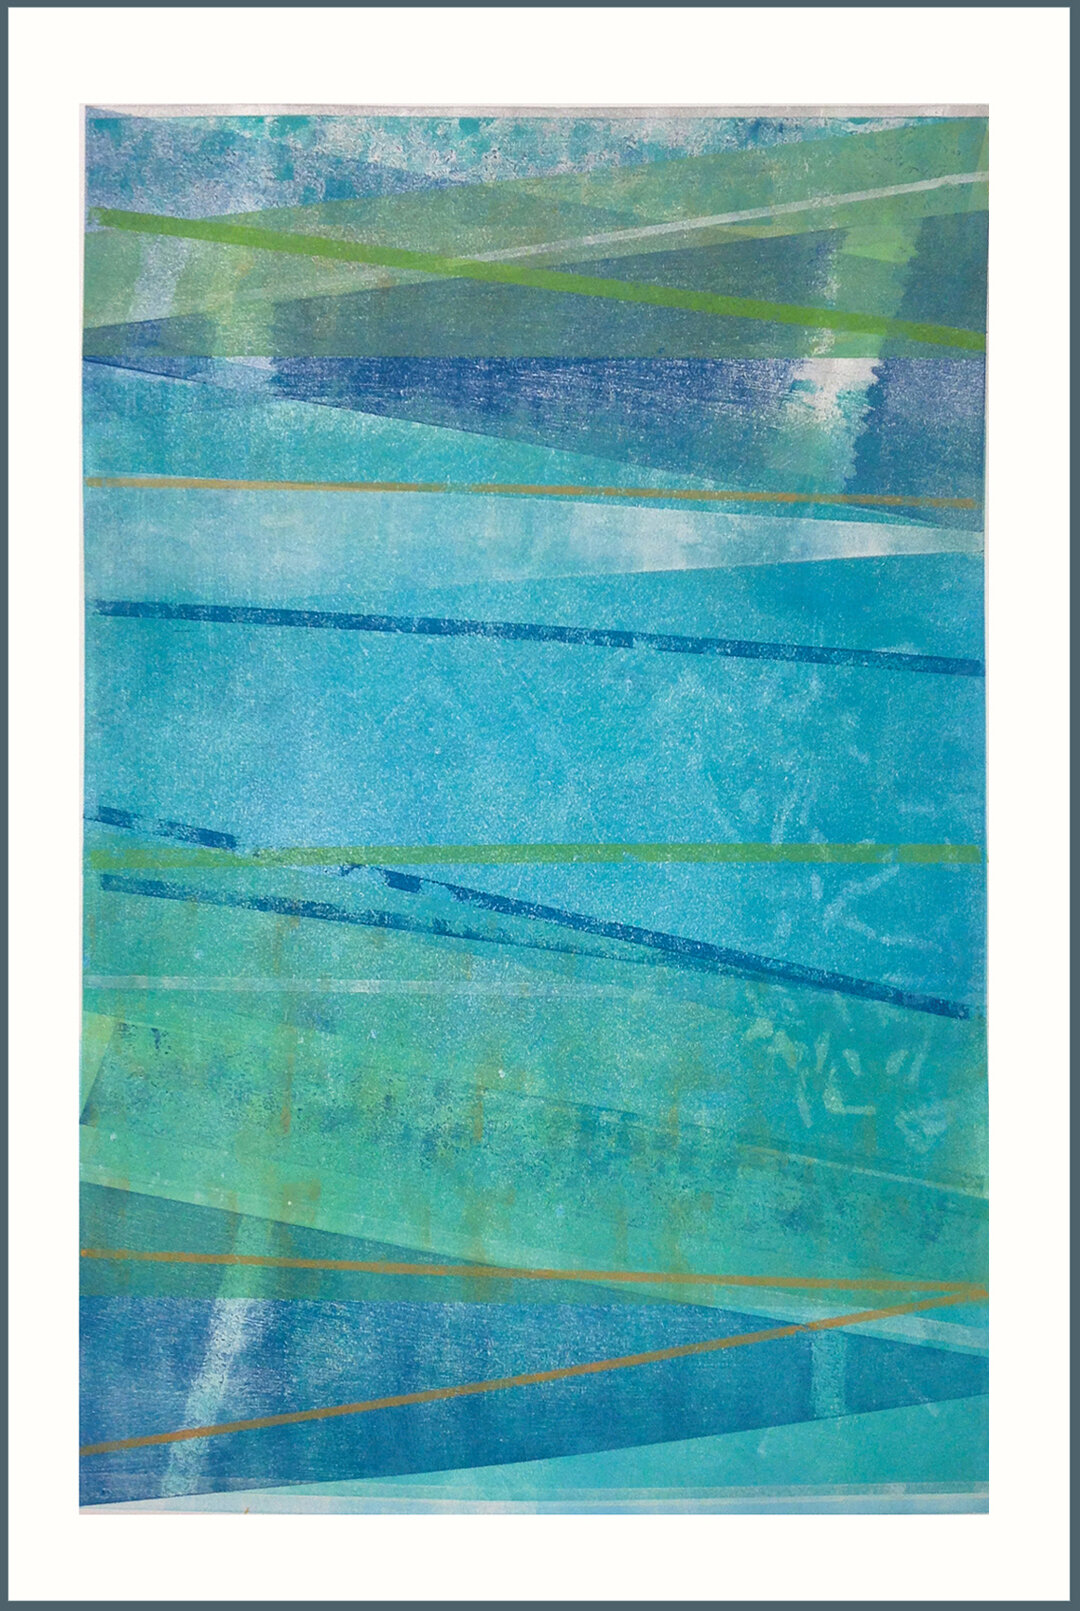    Swim Meet   is 22 x 30 inches unframed. It is a monotype created with individual templates that were layered and overlayered with ink. This print ran through the press numerous times to achieve this effect.   $160    